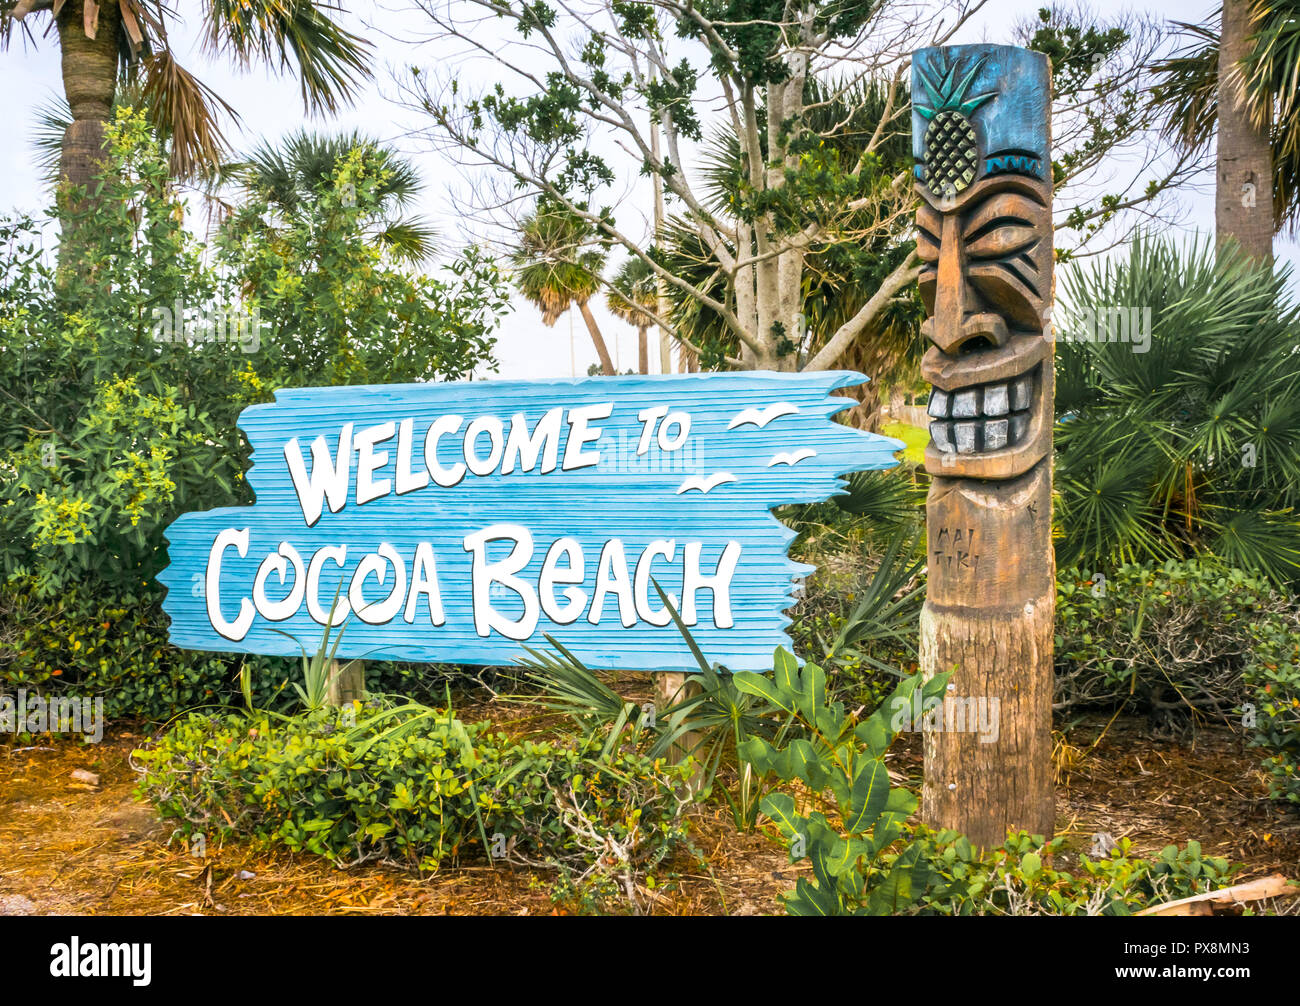 Cocoa Beach, Florida, USA - October 19, 2018: Welcome sign located on the 520 Causeway into Cocoa Beach. Stock Photo